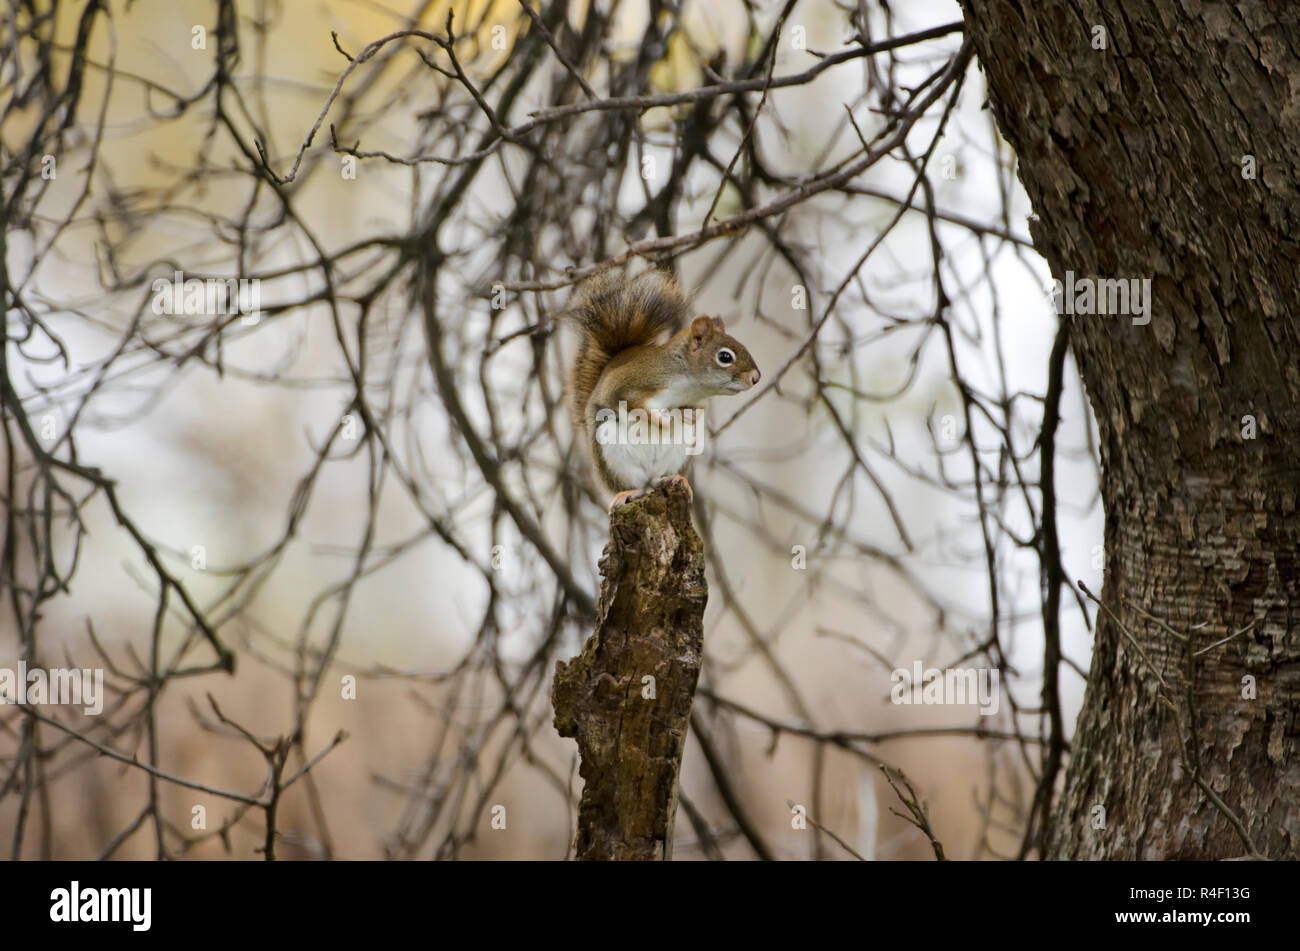 A red squirrel perched on a tree stump Stock Photo